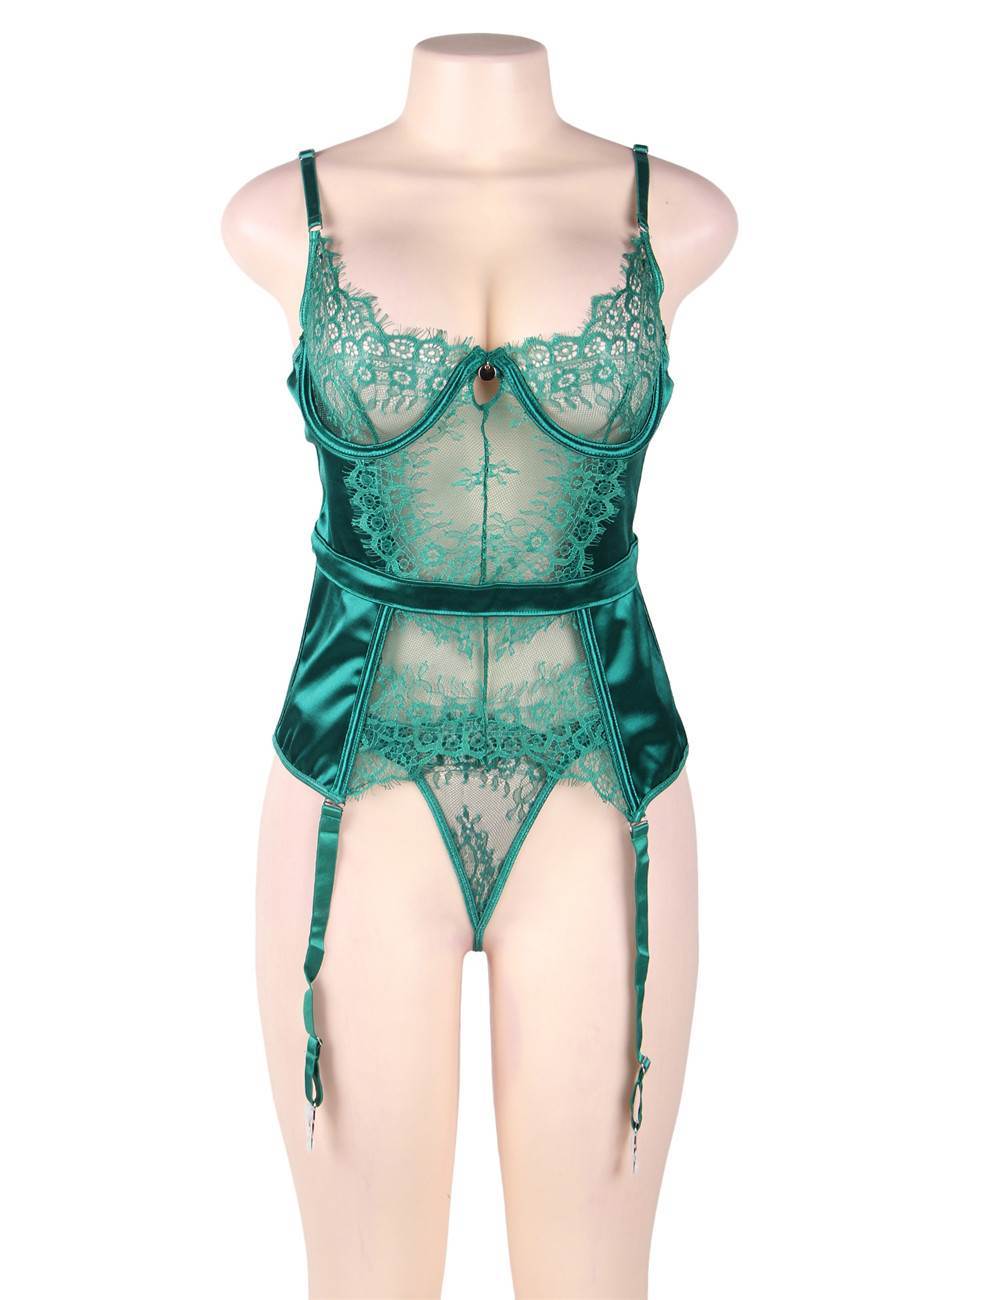 Emerald Lace Corset - Two Sizes Available - Lingerie